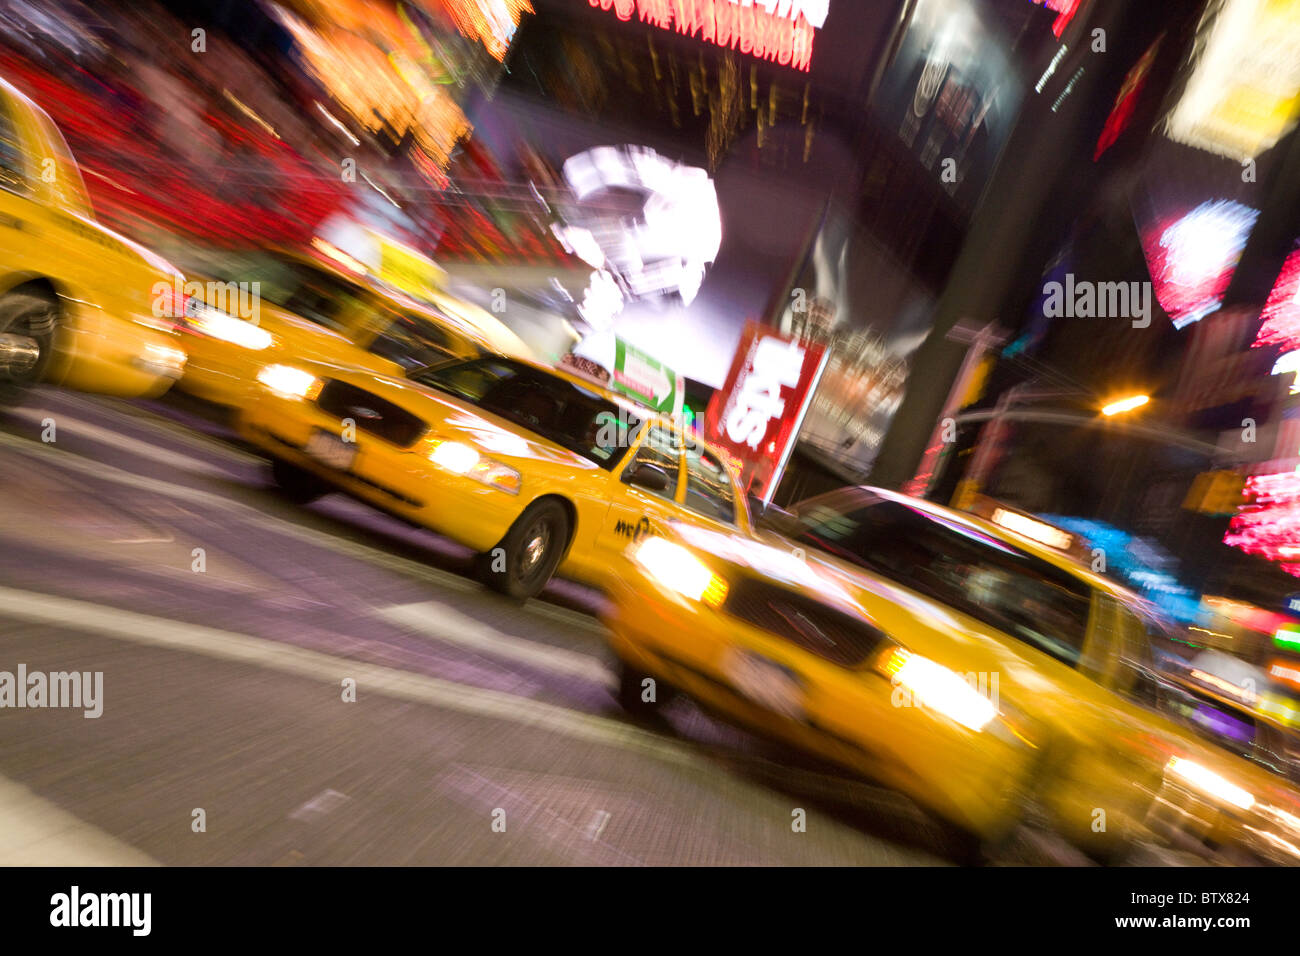 Blurred yellow taxi cabs in Times Square, New York Stock Photo